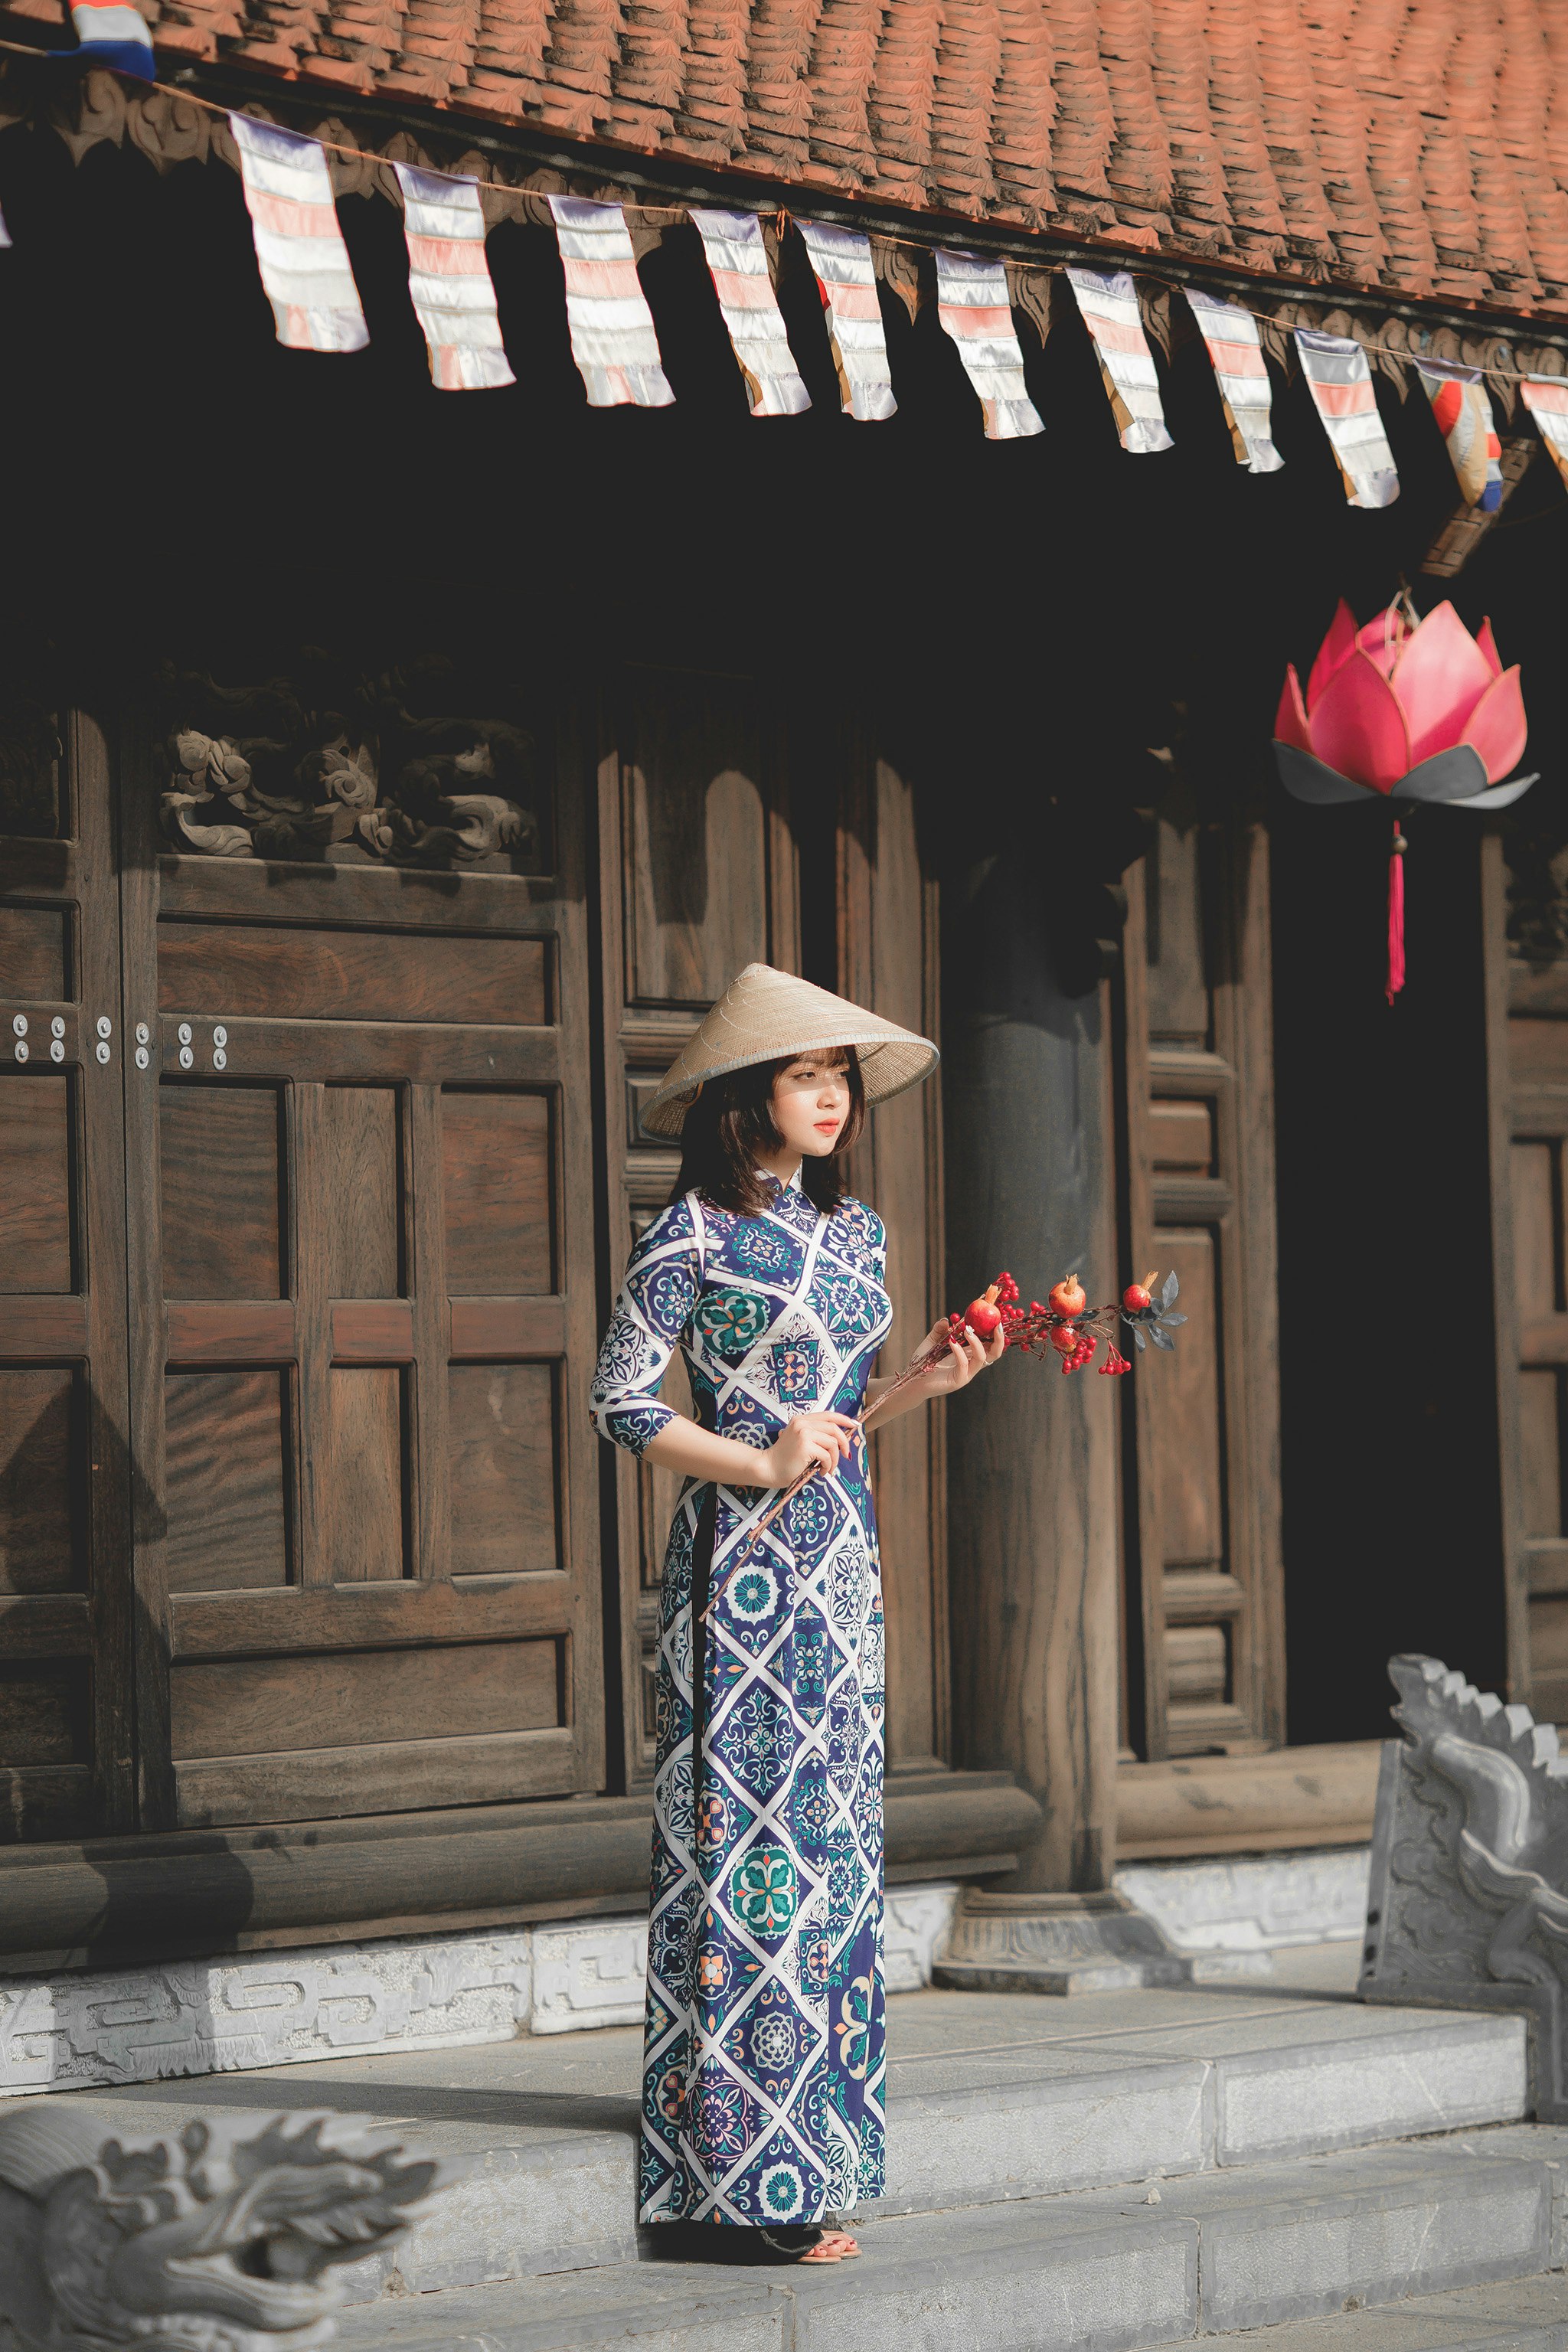 woman in blue and white floral dress wearing black hat standing near brown wooden door